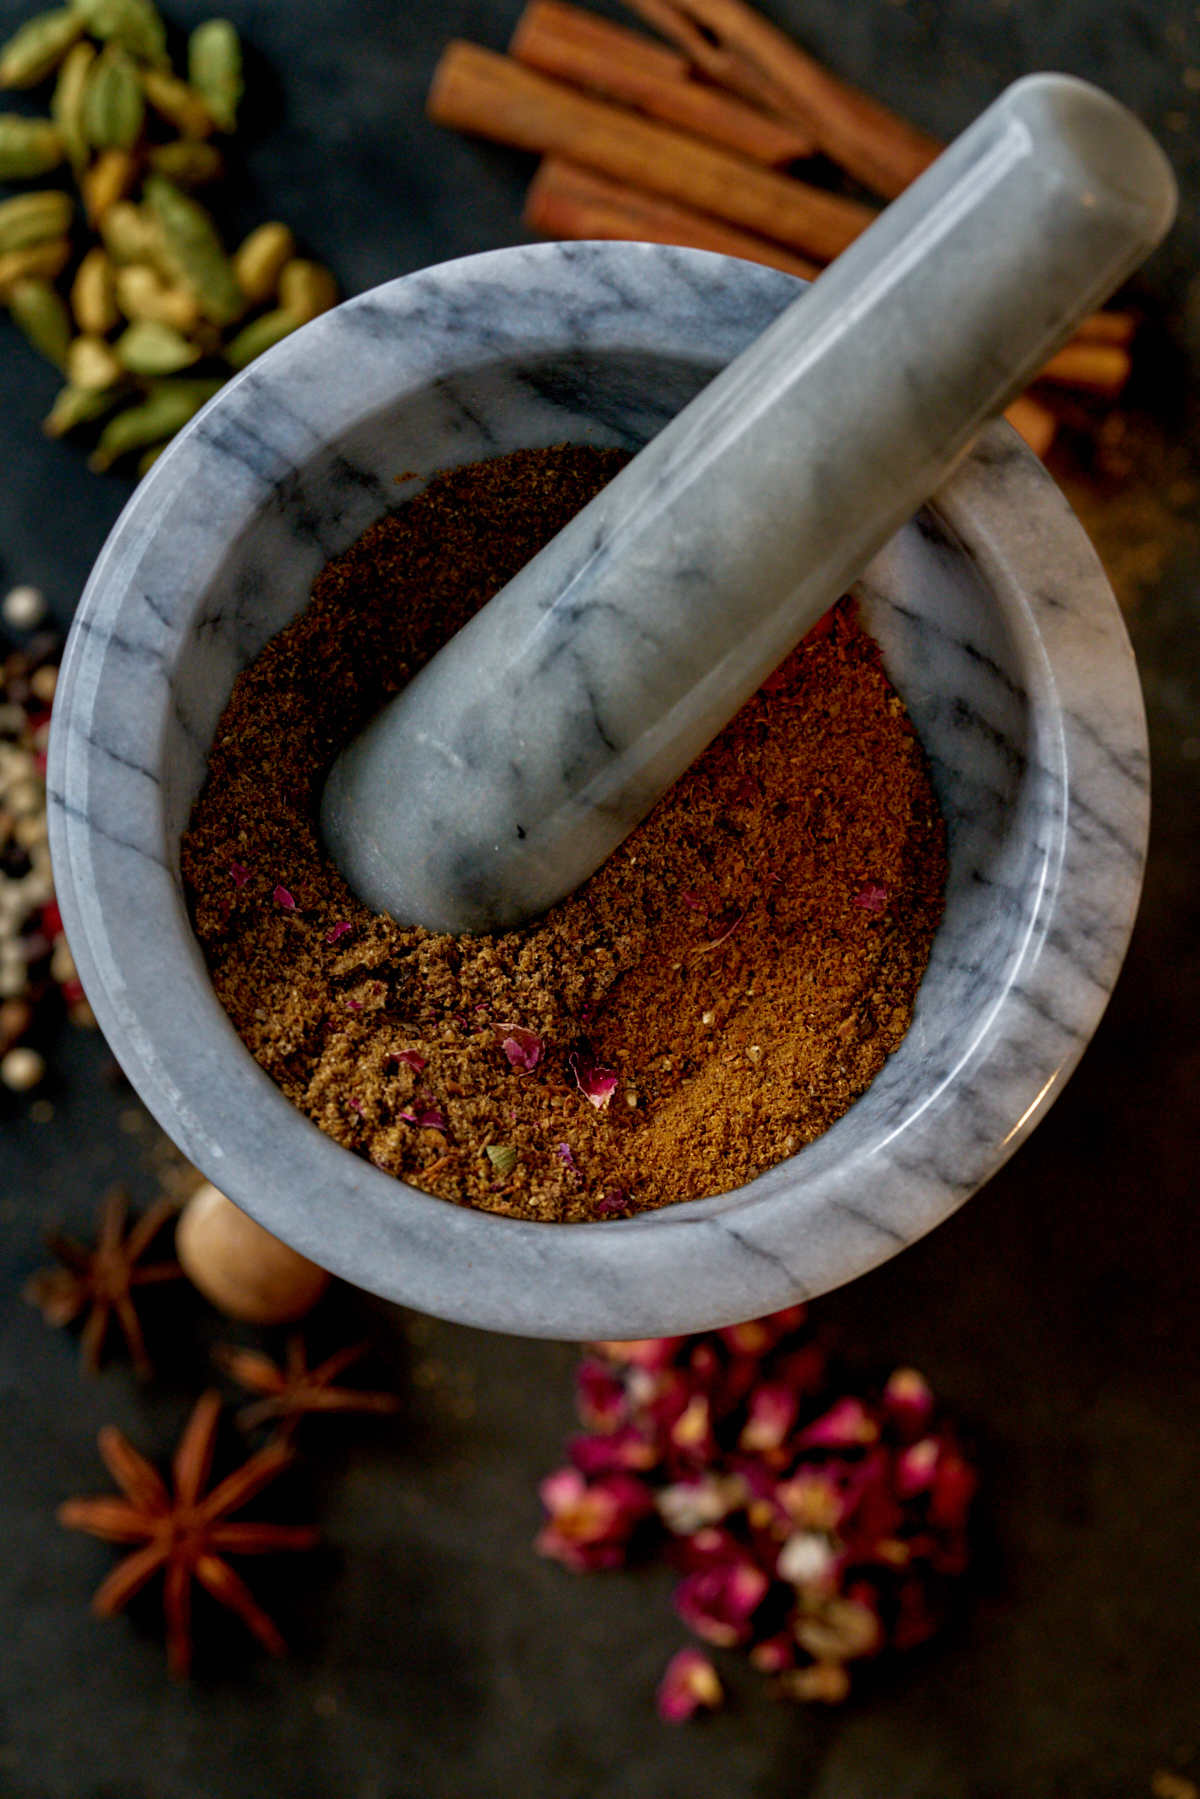 Spices in a mortar and pestle.